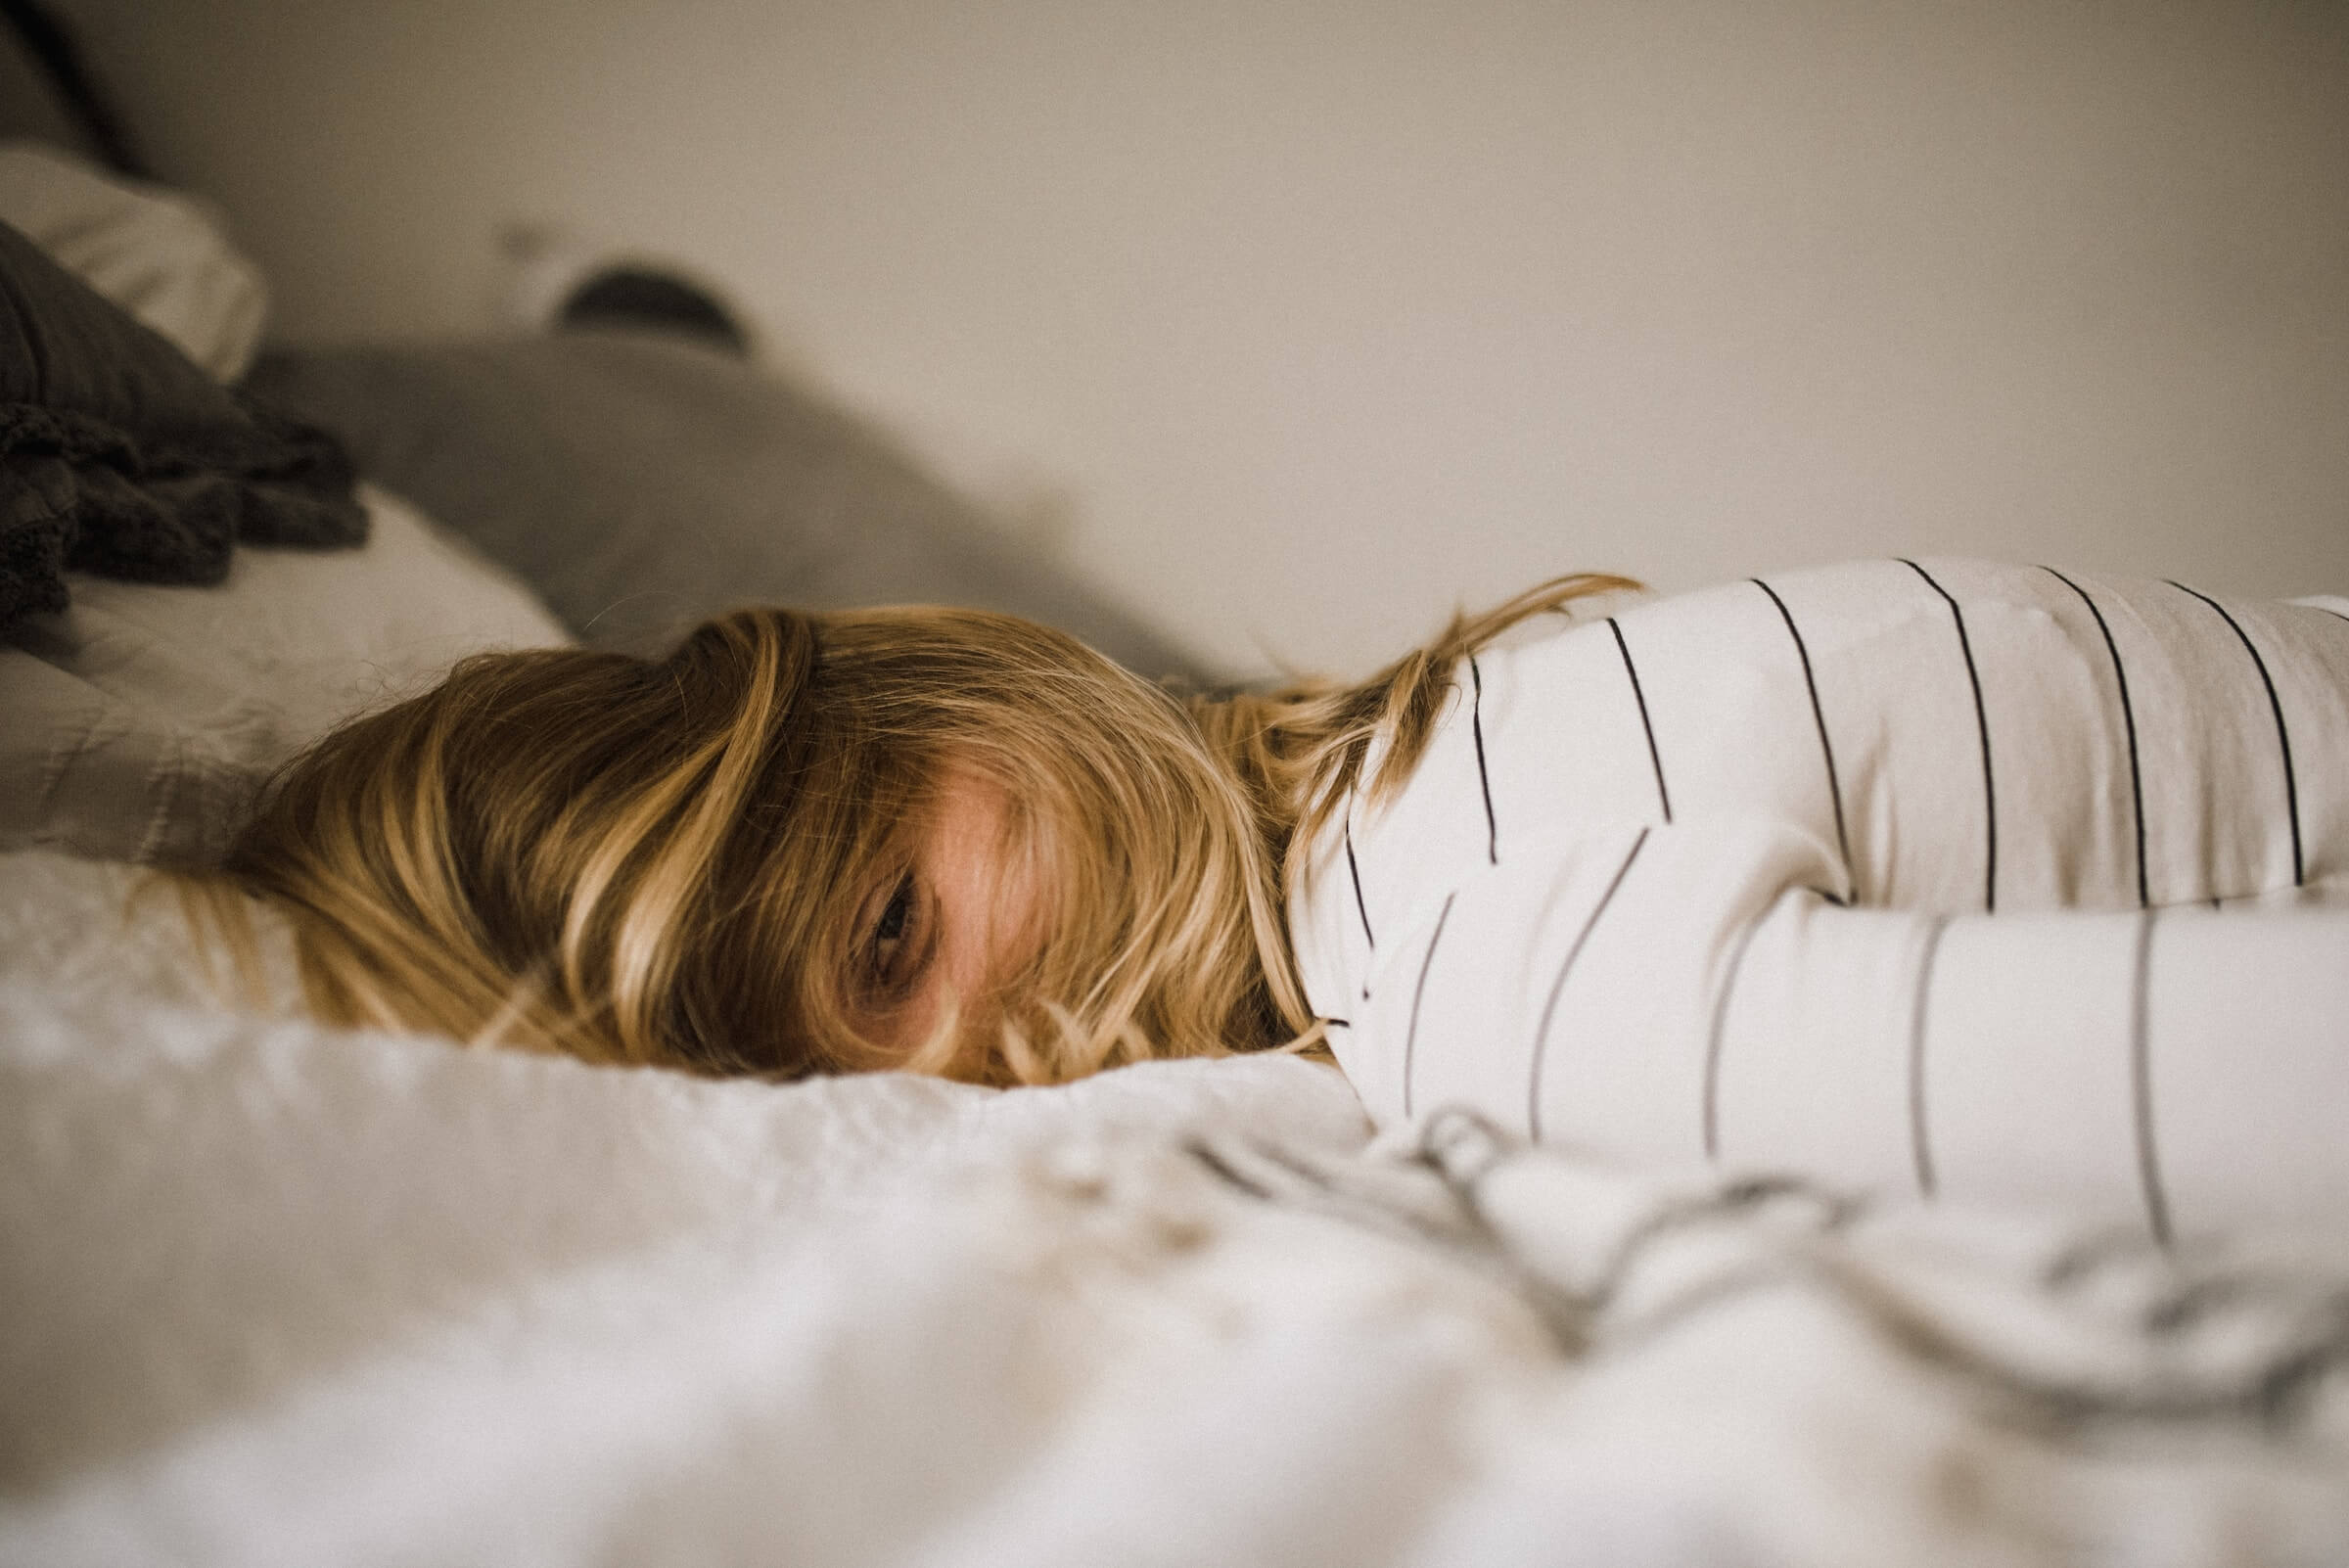 Naturopathic solutions for insomnia and perimenopause